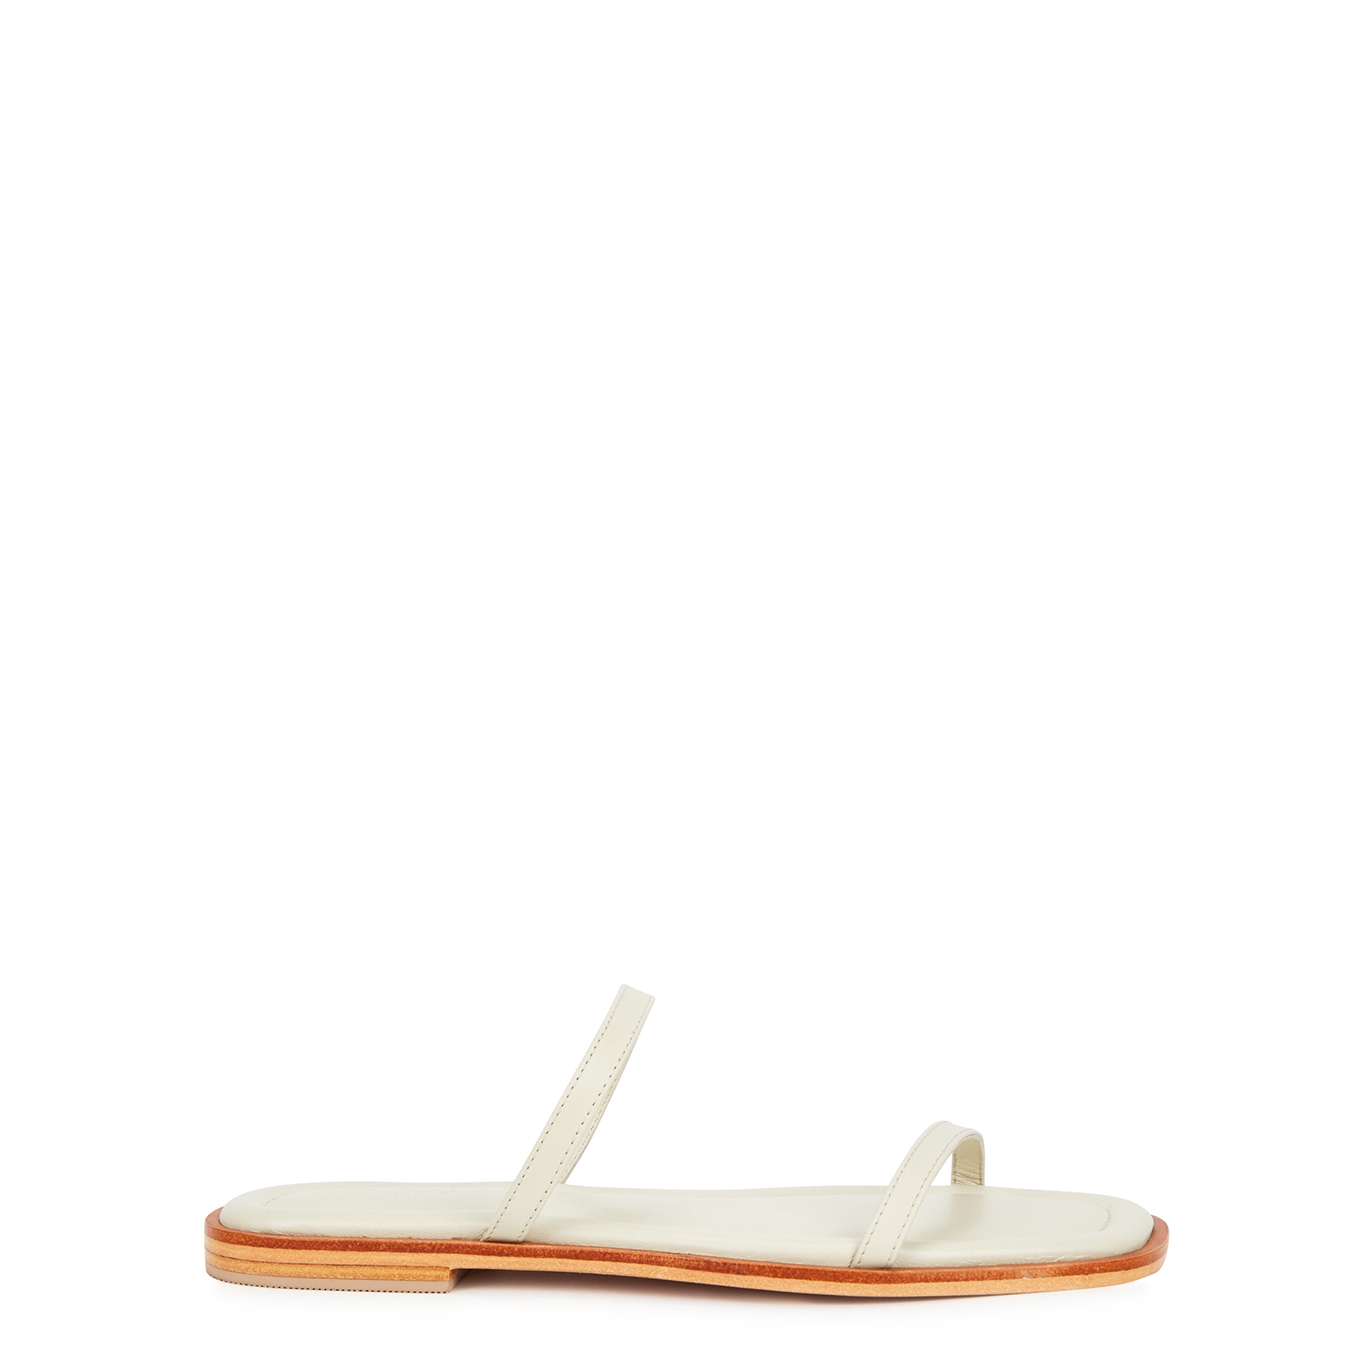 A.Emery Lome Leather Sandals